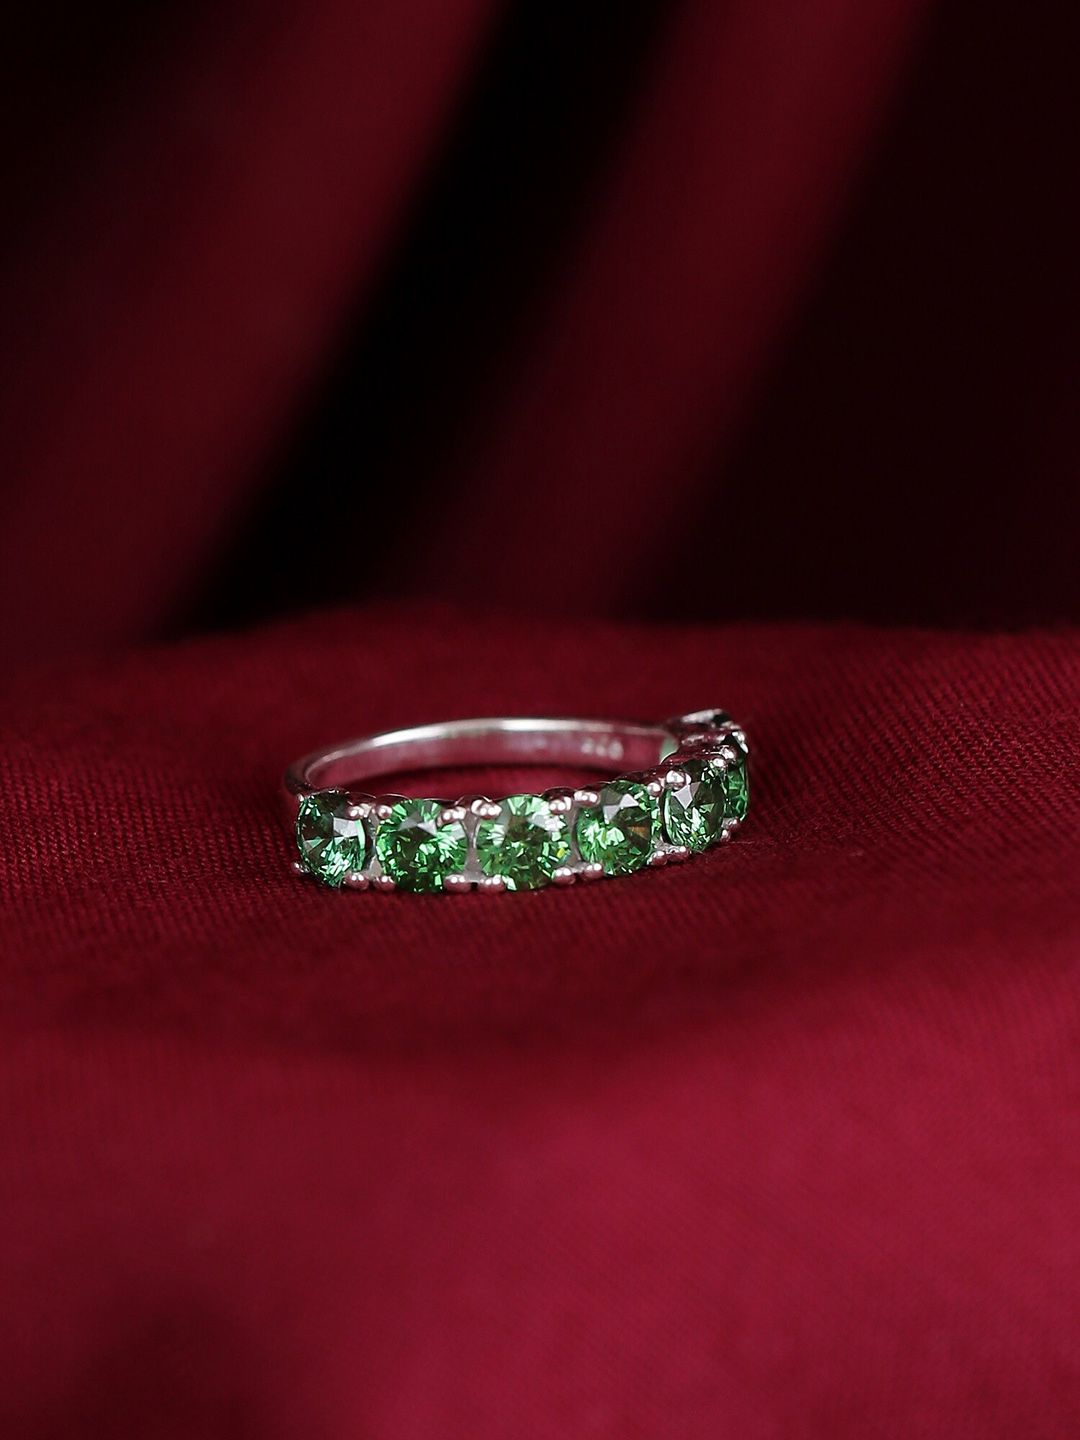 Hiara Jewels Rhodium-Plated Silver-Toned Green CZ-Studded Finger Ring Price in India